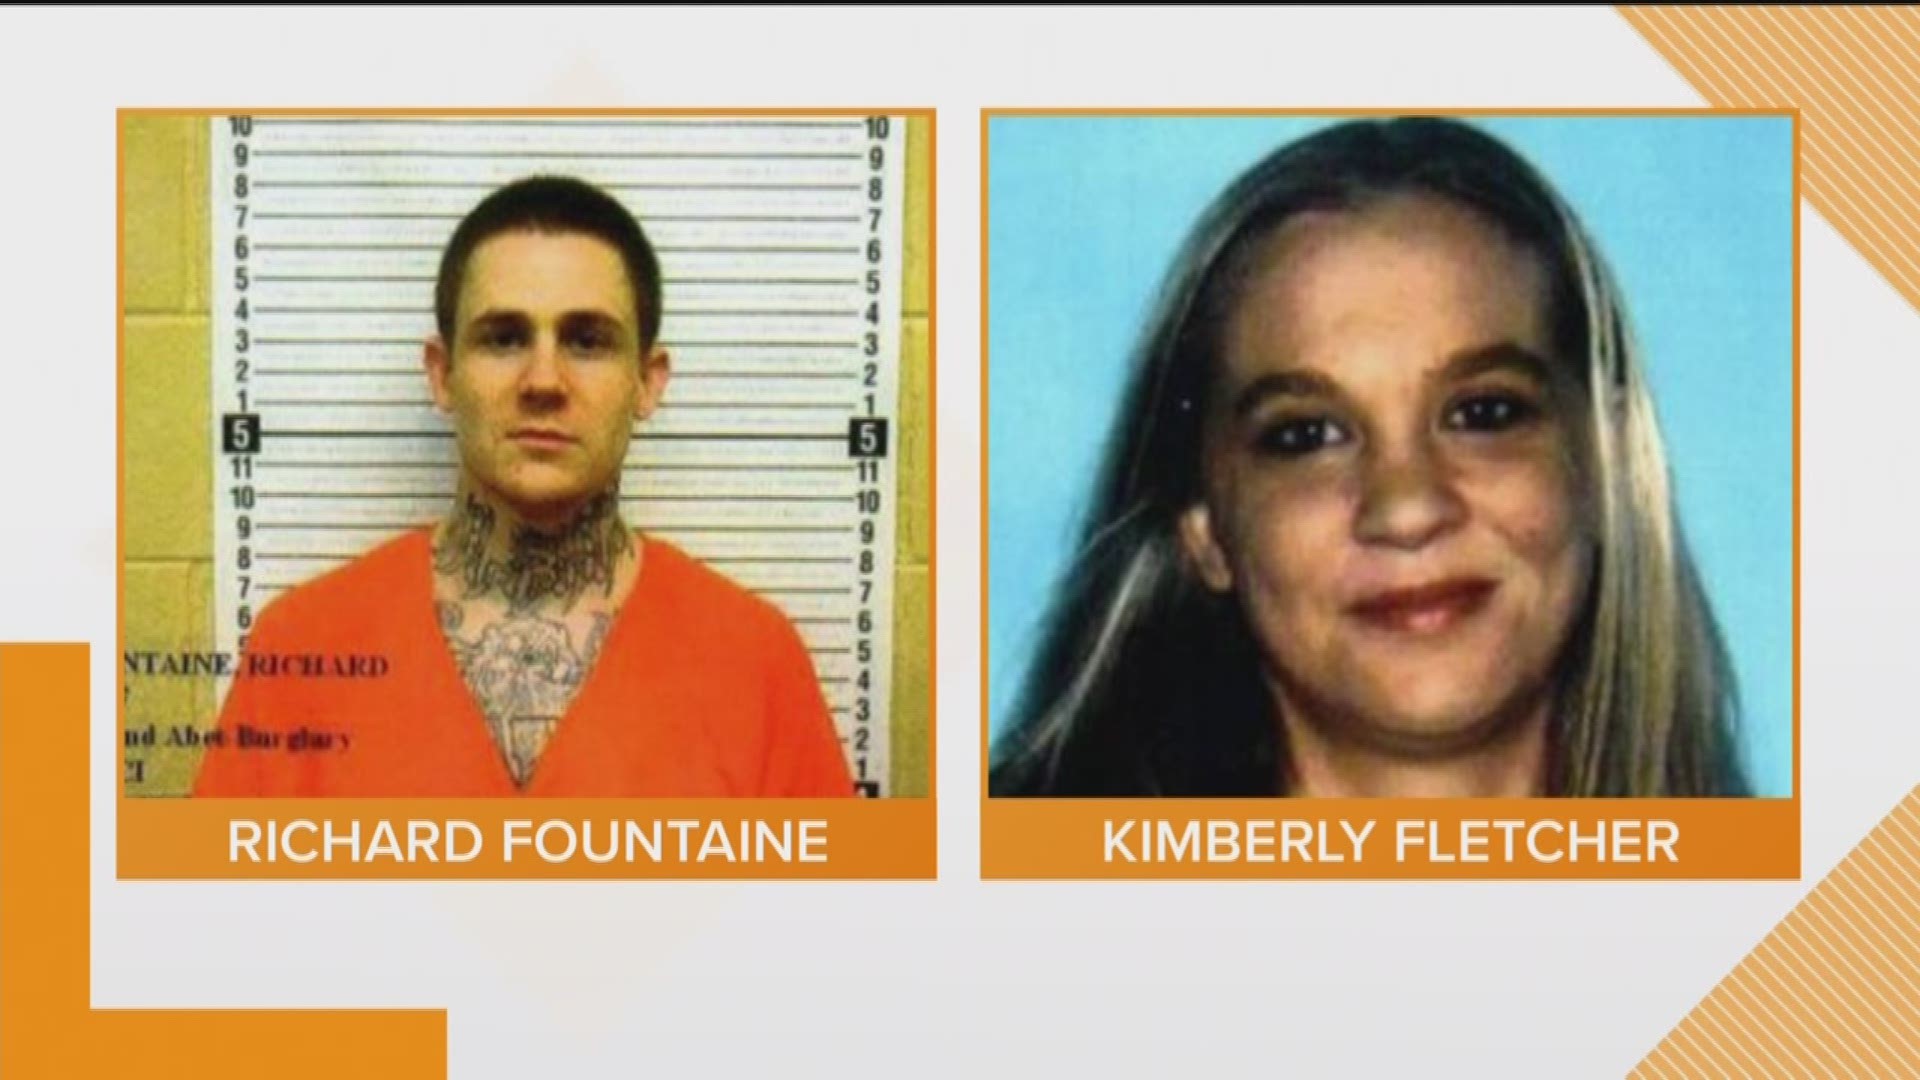 Richard Fountaine escaped from a prison in Wyoming, and Kimberly Fletcher helped him.